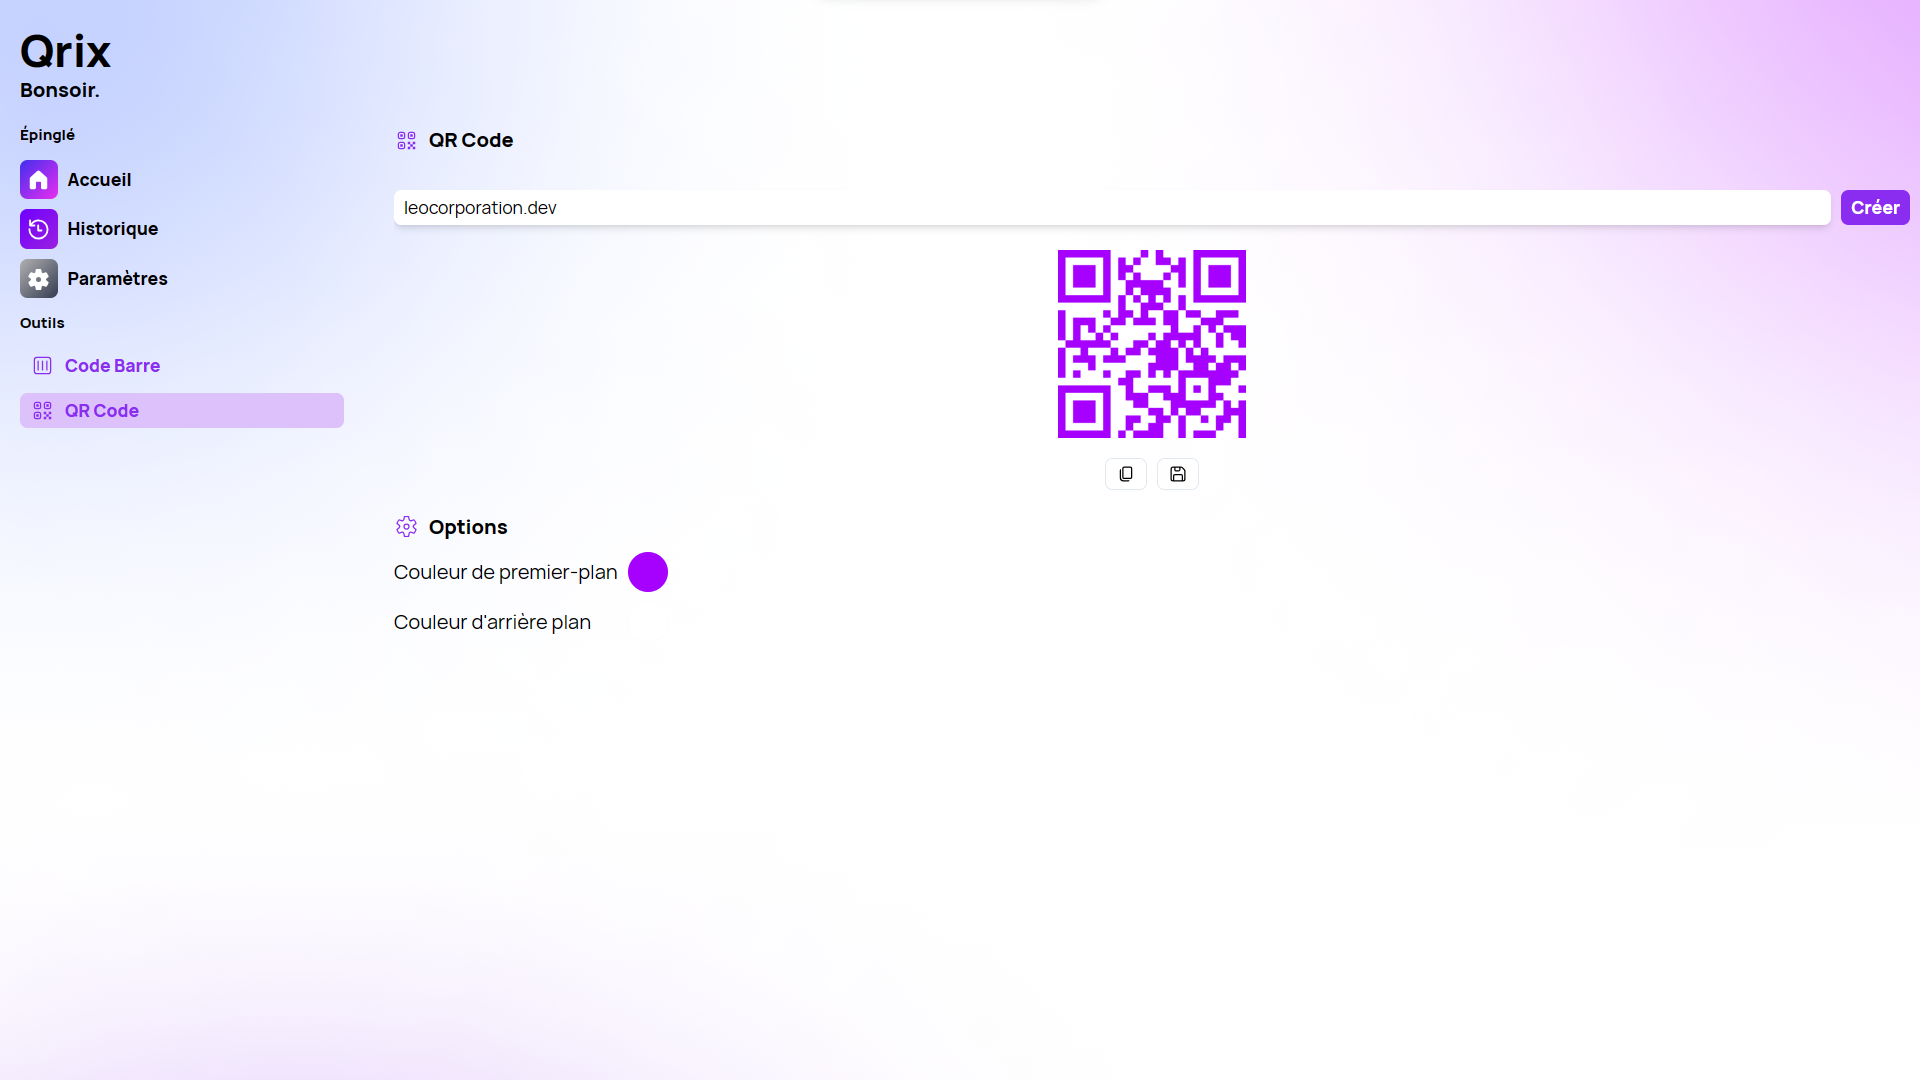 A screenshot of the 'QR Code' page of Qrix